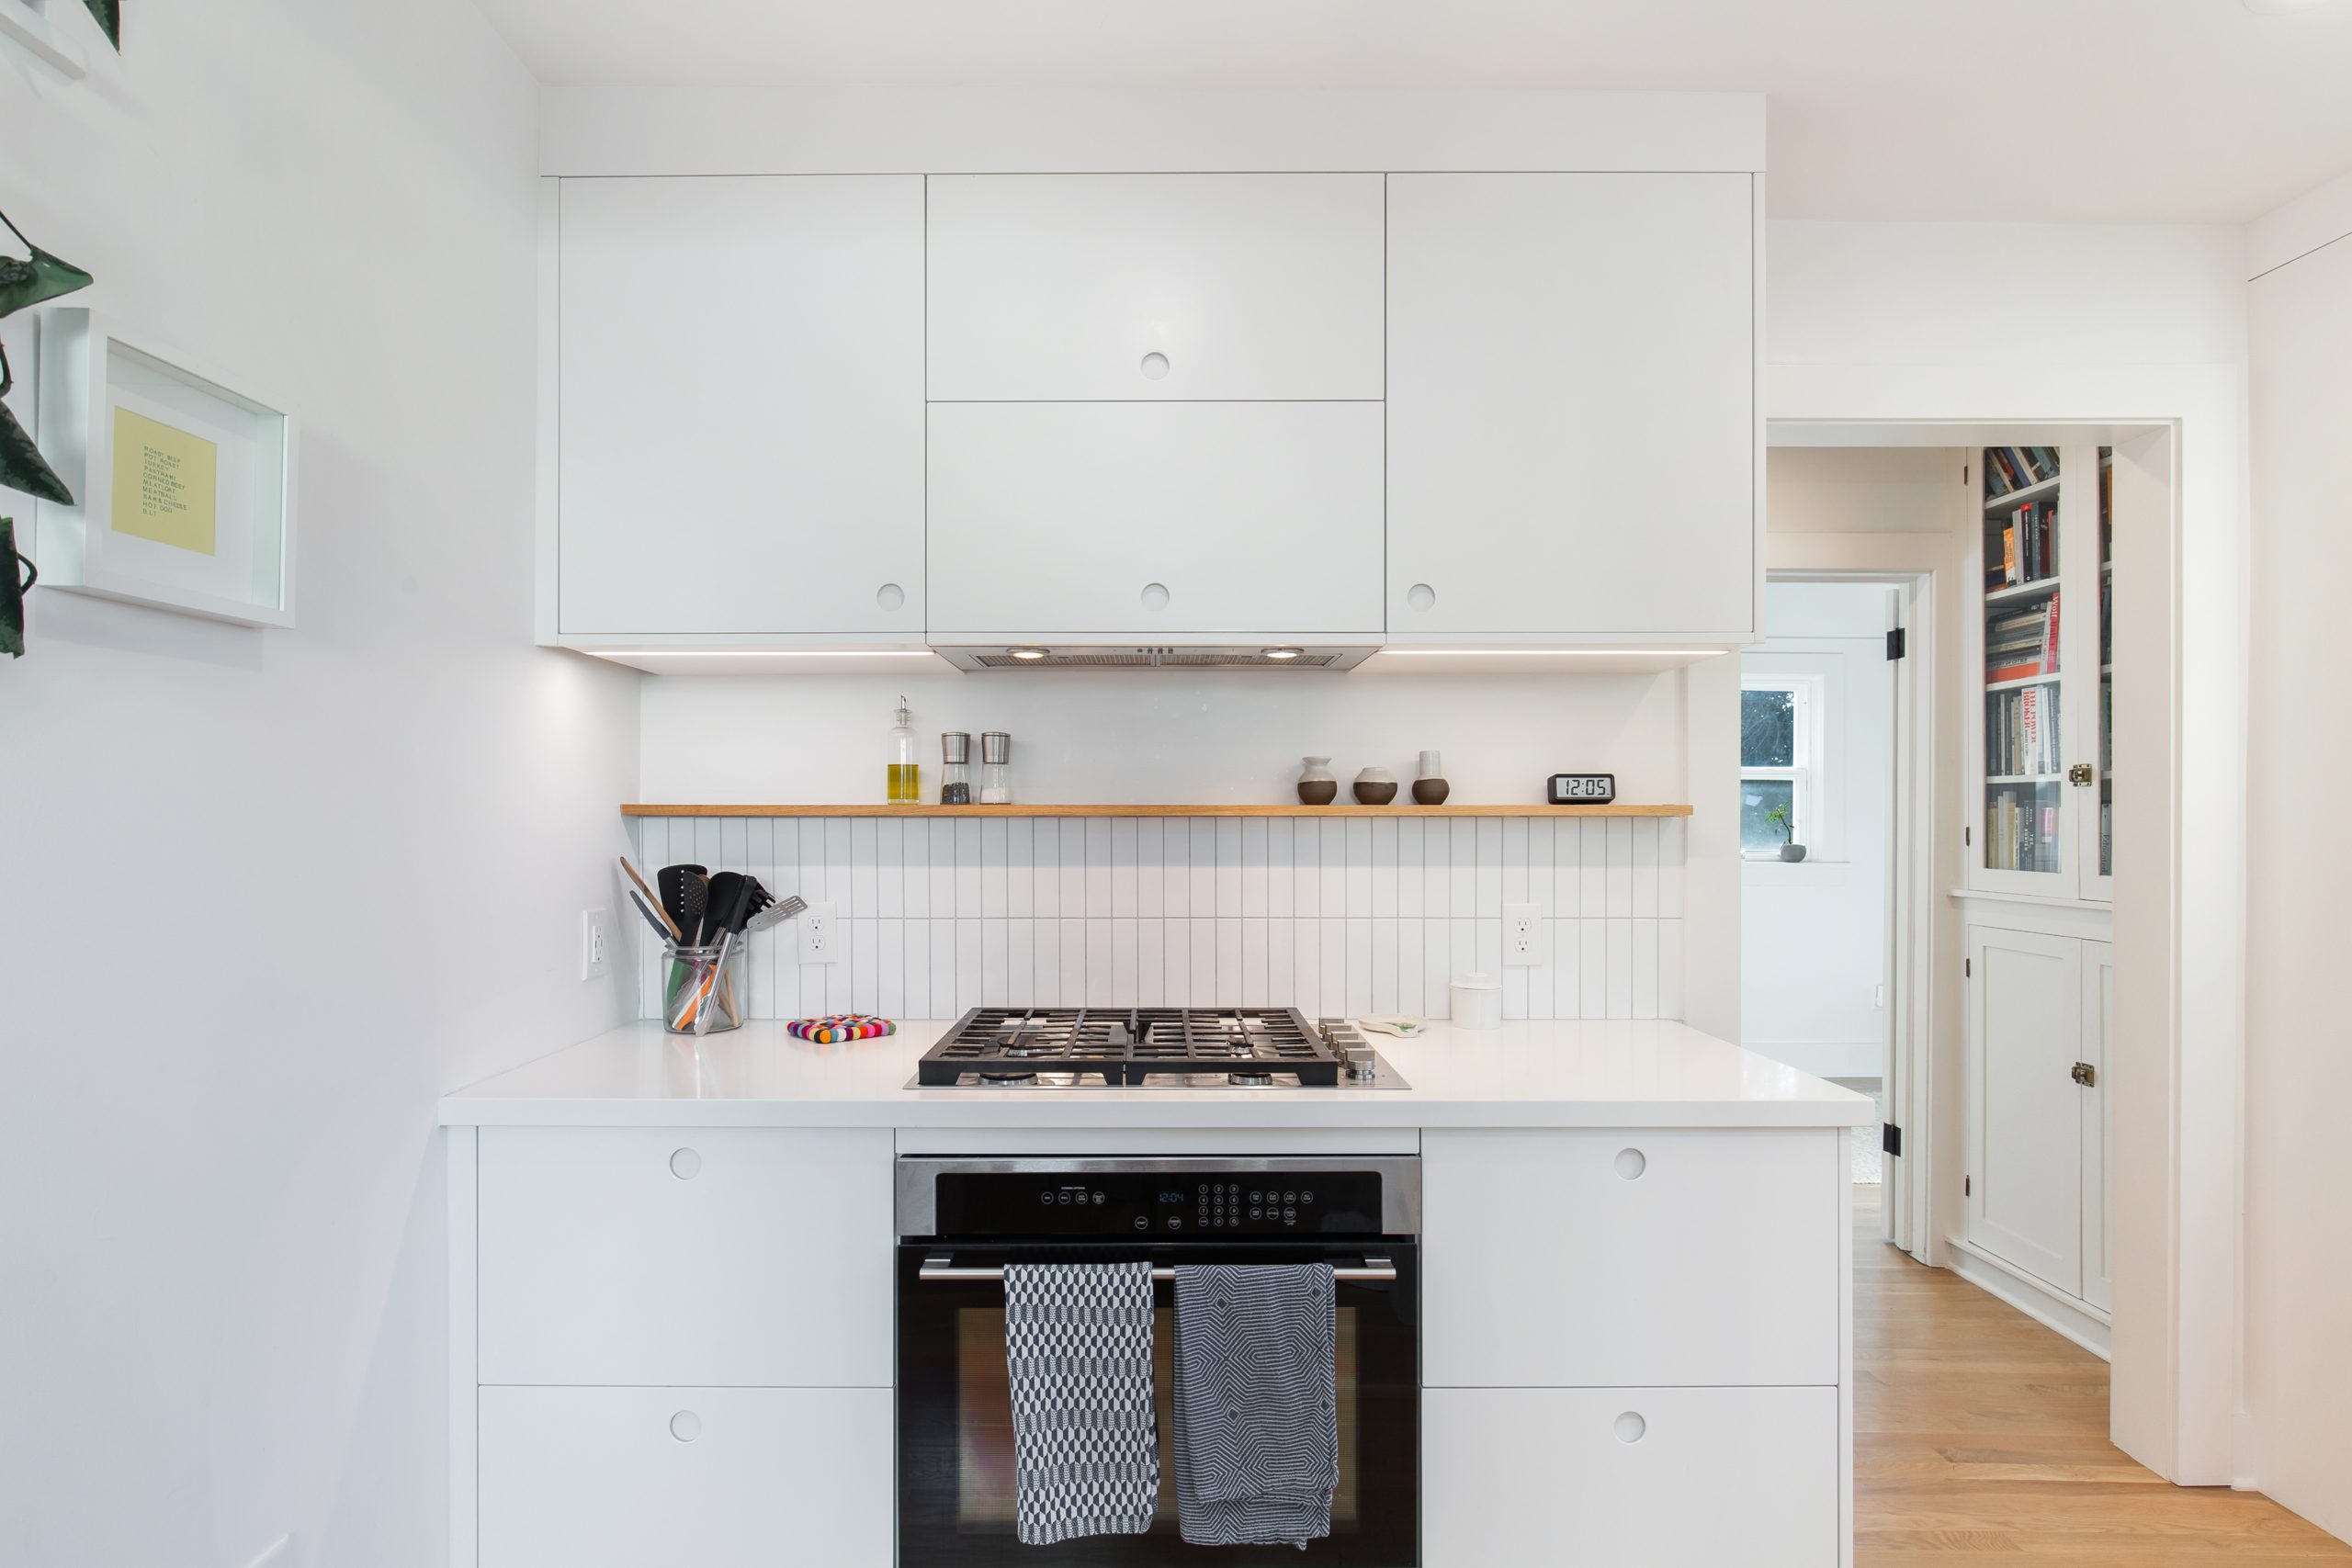 All white mini kitchen remodel with white cabinetry, white walls, white tile, an oven, other appliances and wooden flooring